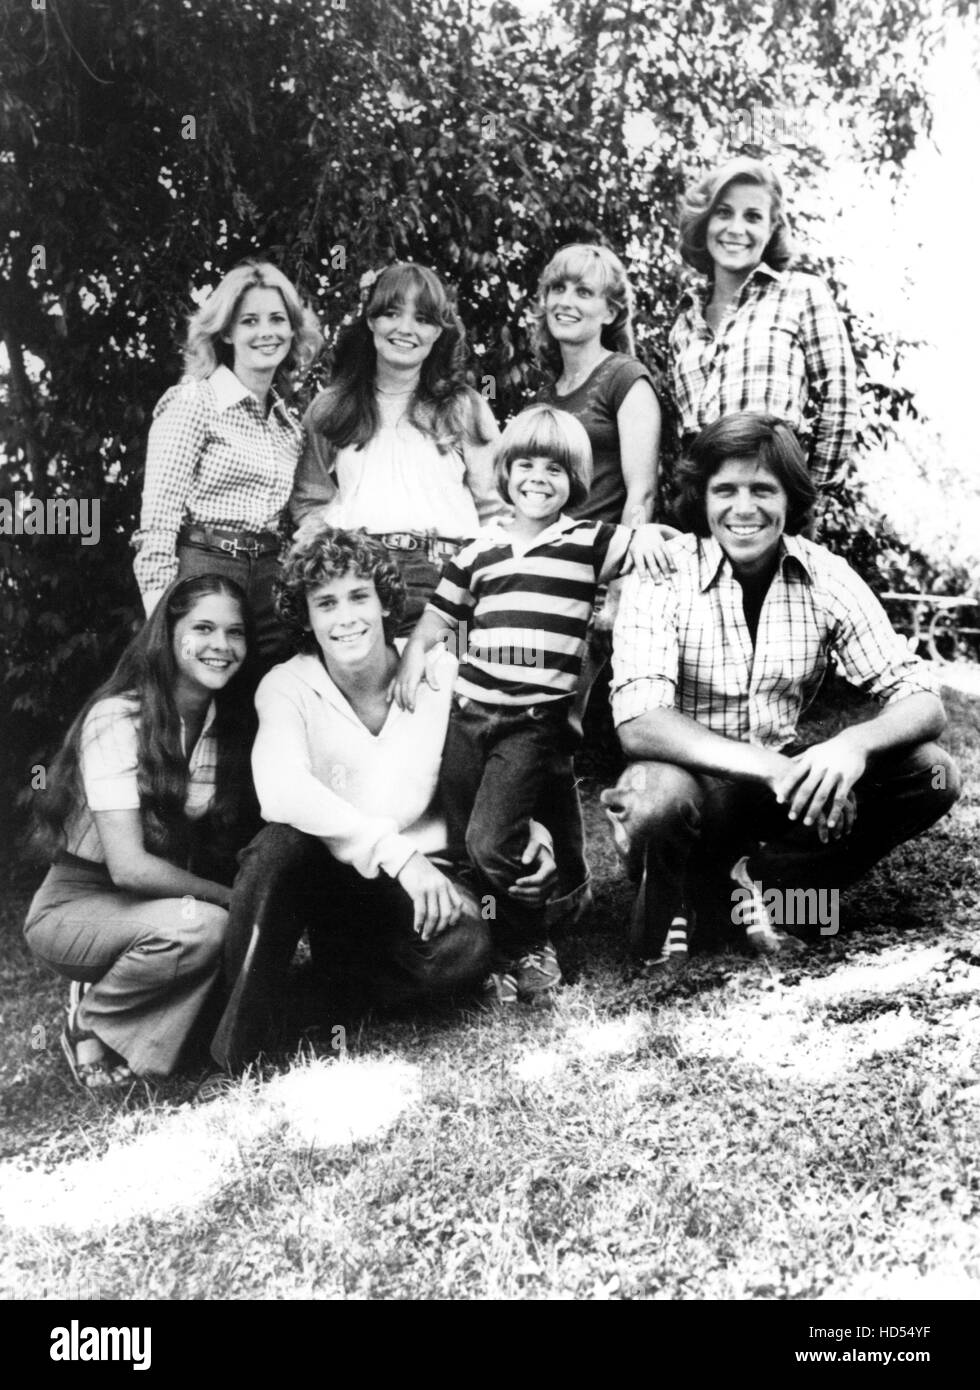 EIGHT IS ENOUGH, (Top, L-R) Dianne Kay, Susan Richardson, Laurie Walters, Lani O'Grady. (Bottom, L-R) Connie Newton, Willie Stock Photo